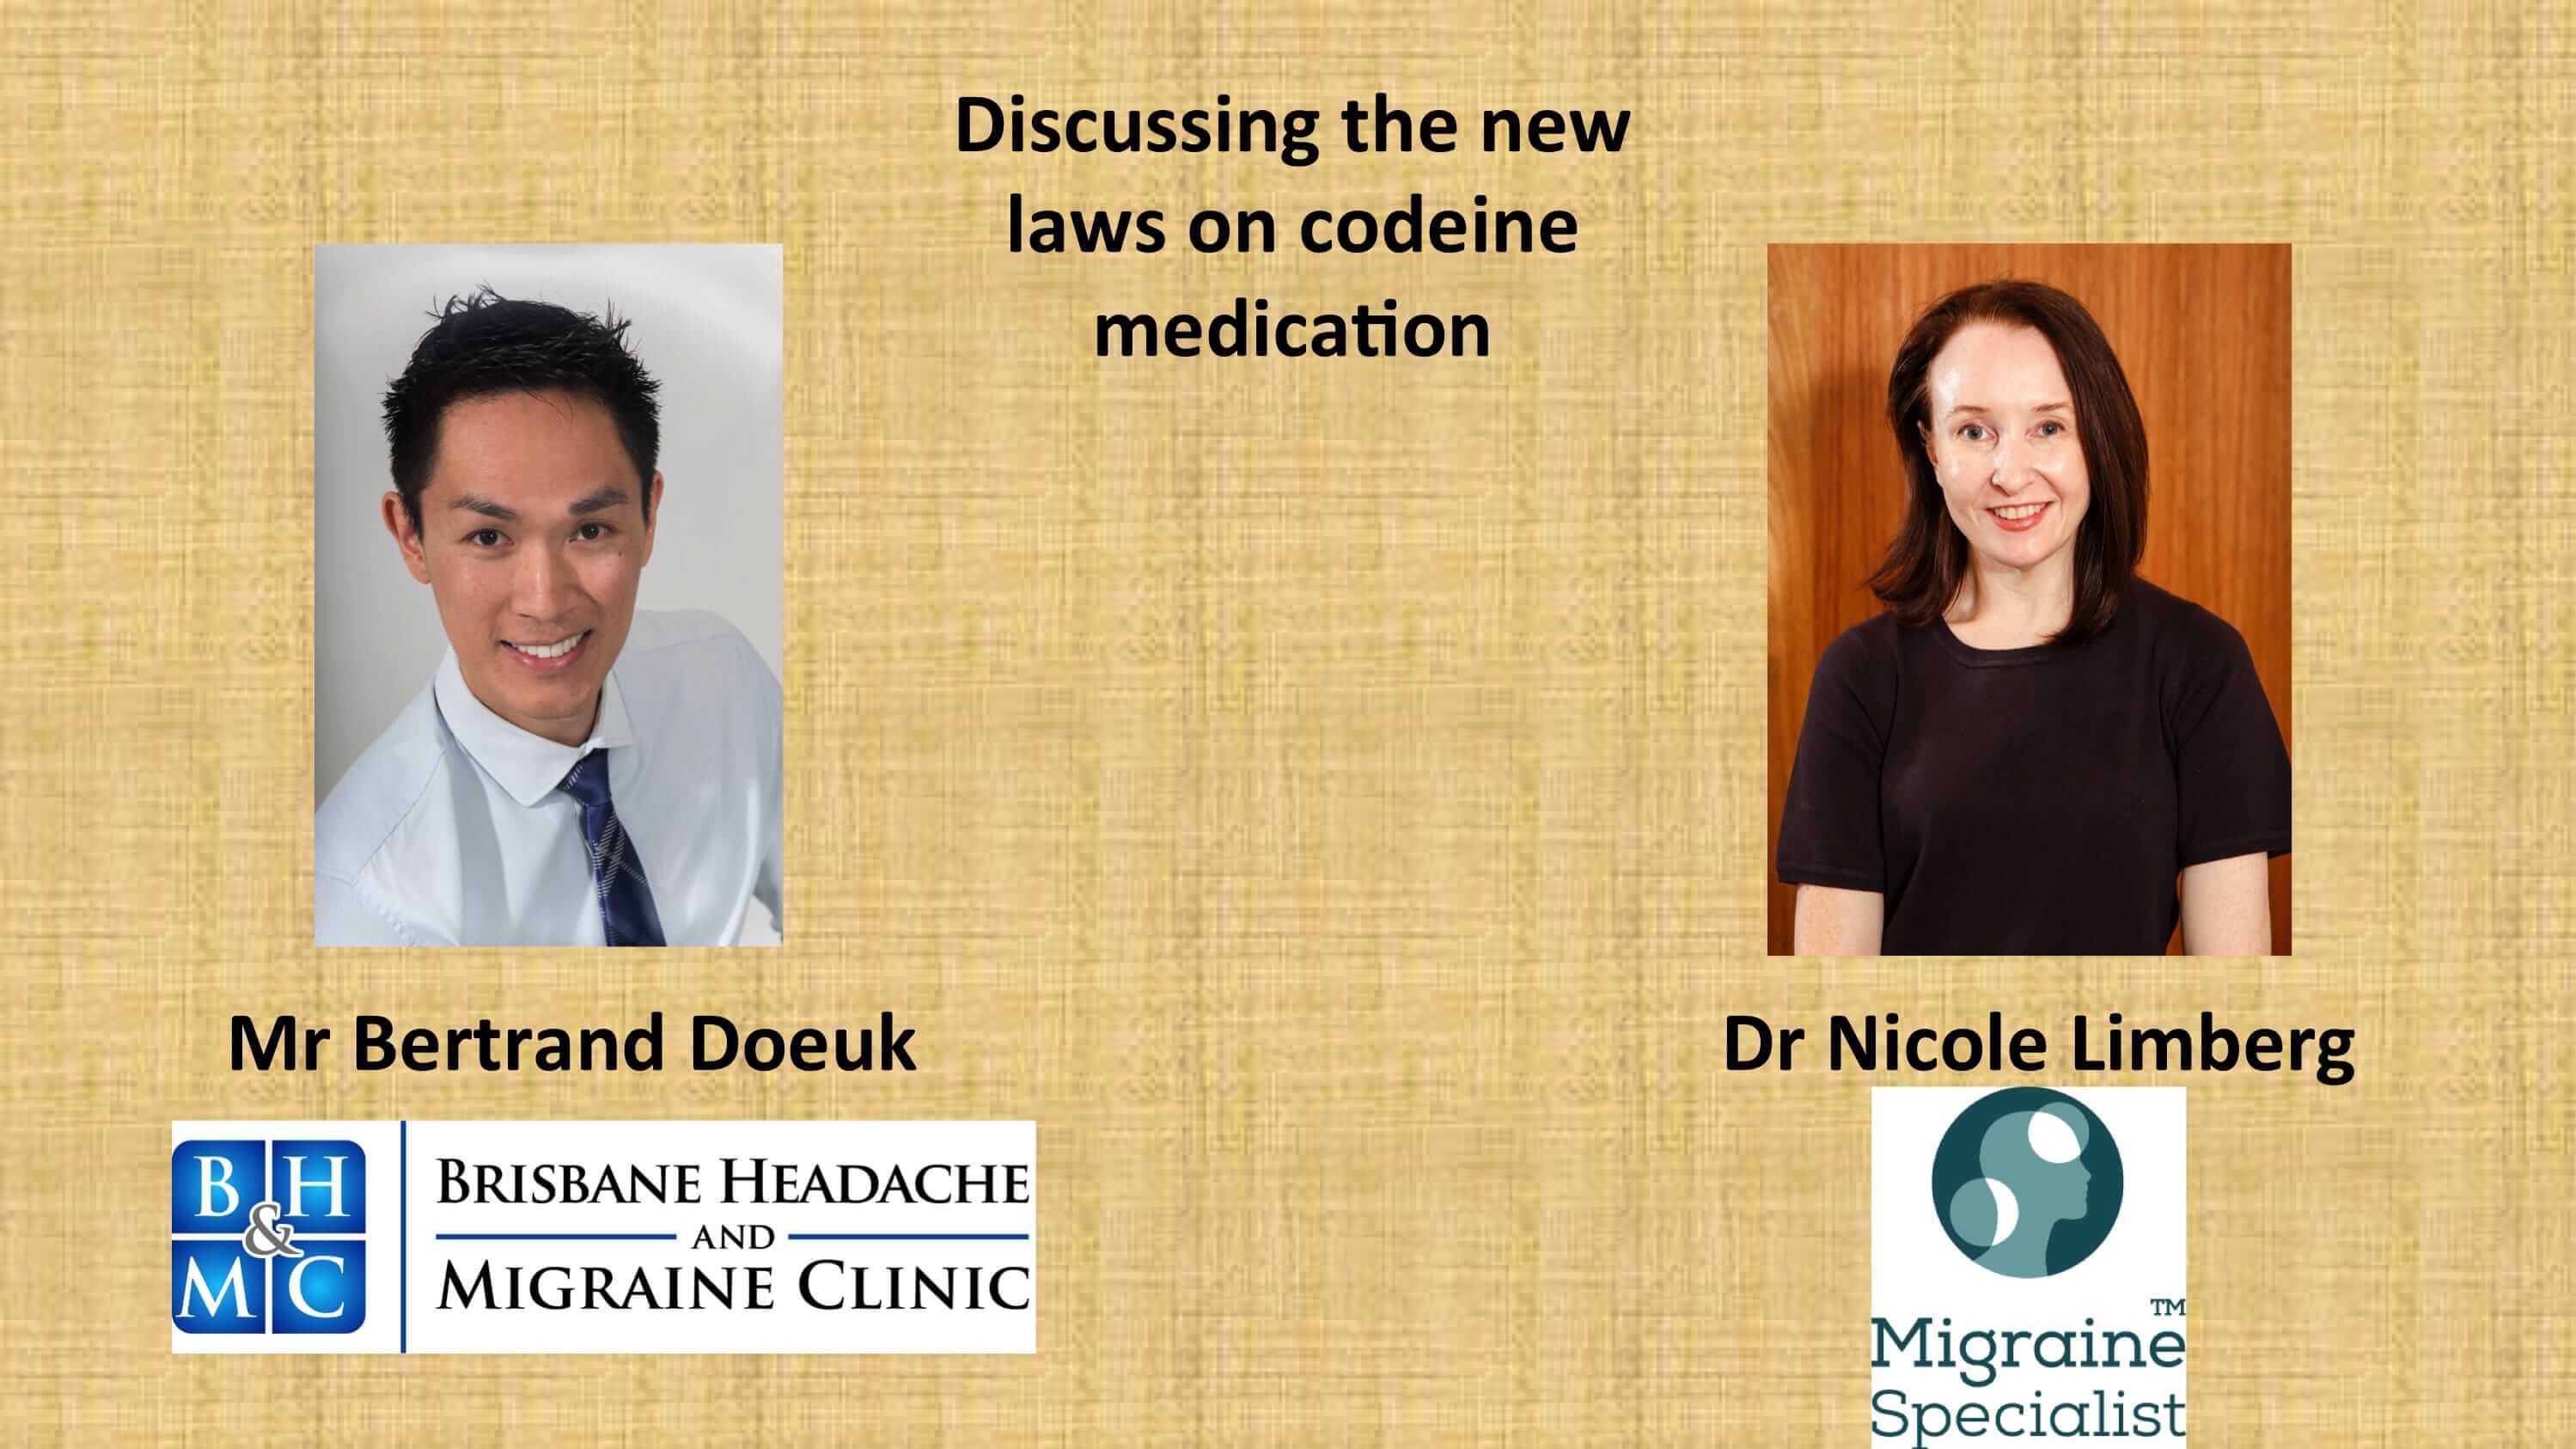 Migraine Health News – New Over-the-Counter Medication Laws. Dr Nicole Limberg and Bertrand Doeuk’s Discussion